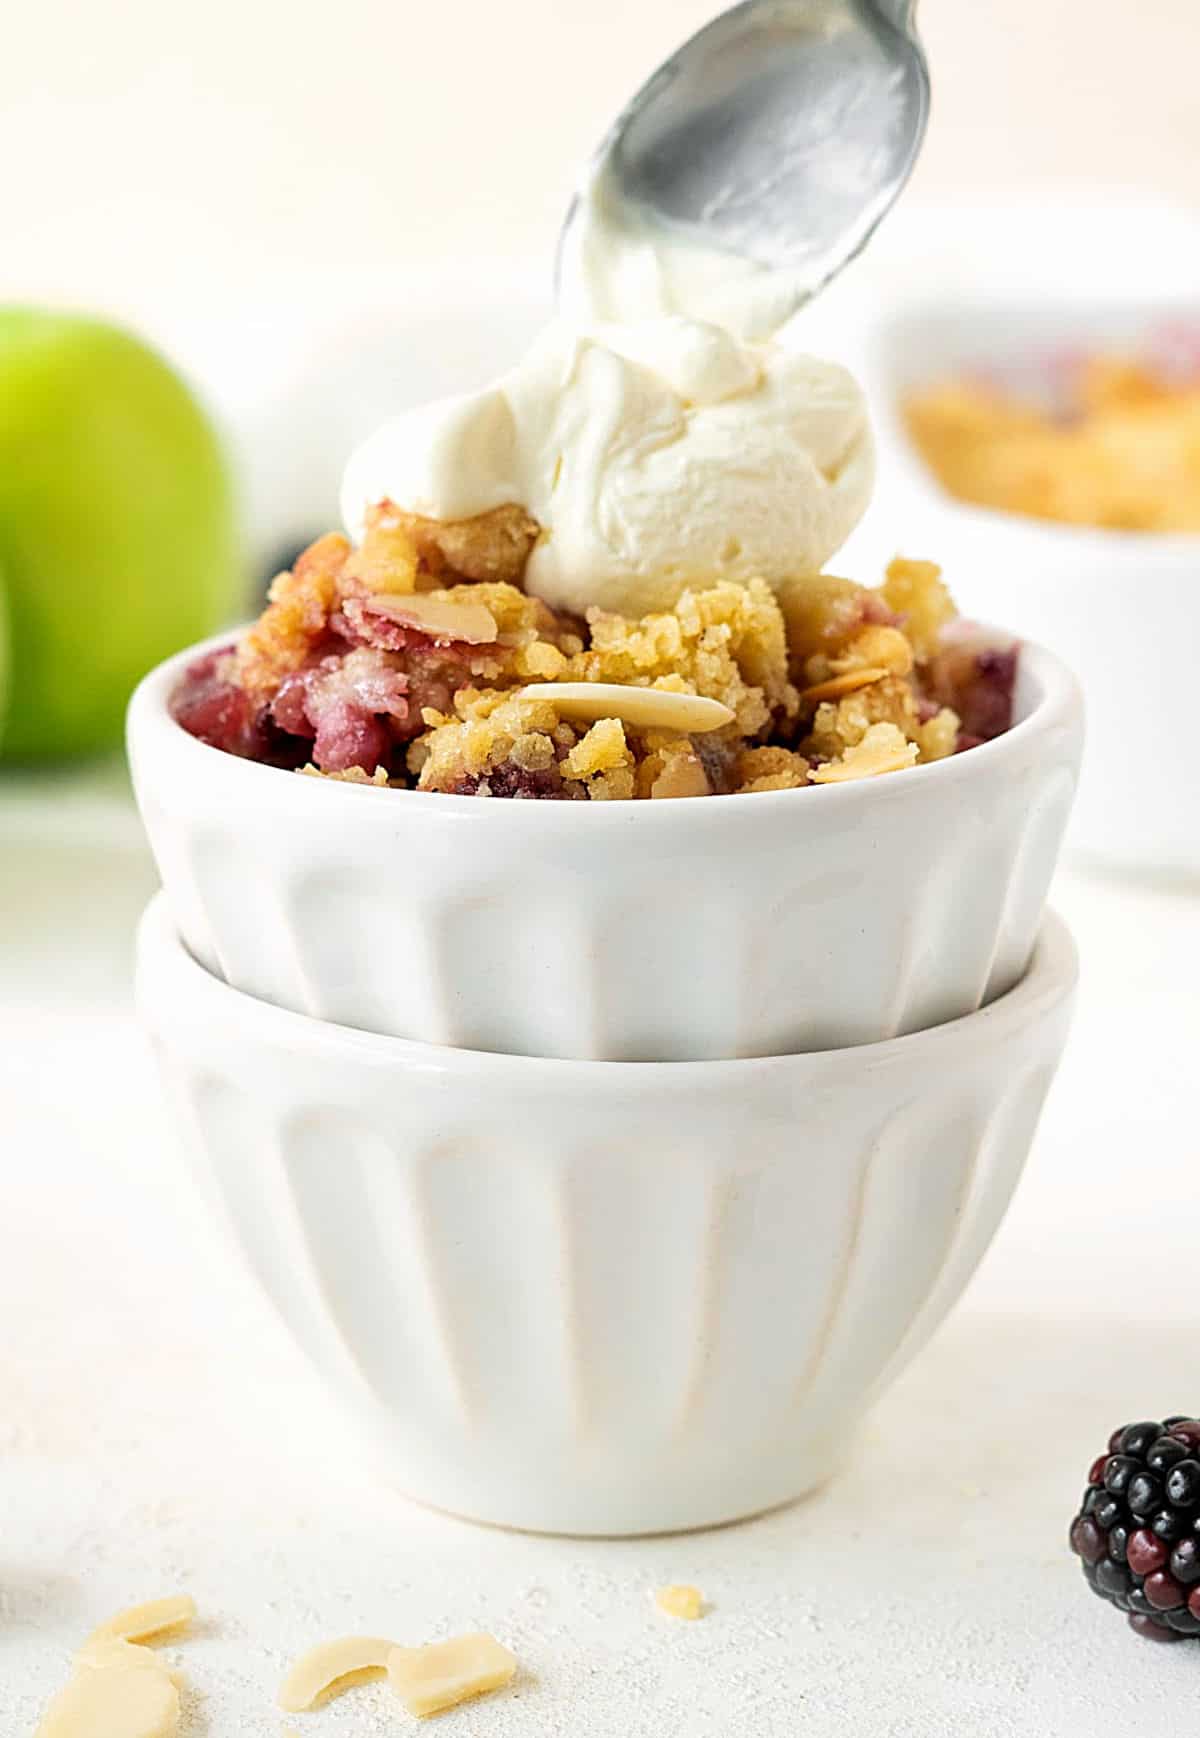 Whipped cream being spooned over stacked white bowls with apple berry crisp. White surface and background.